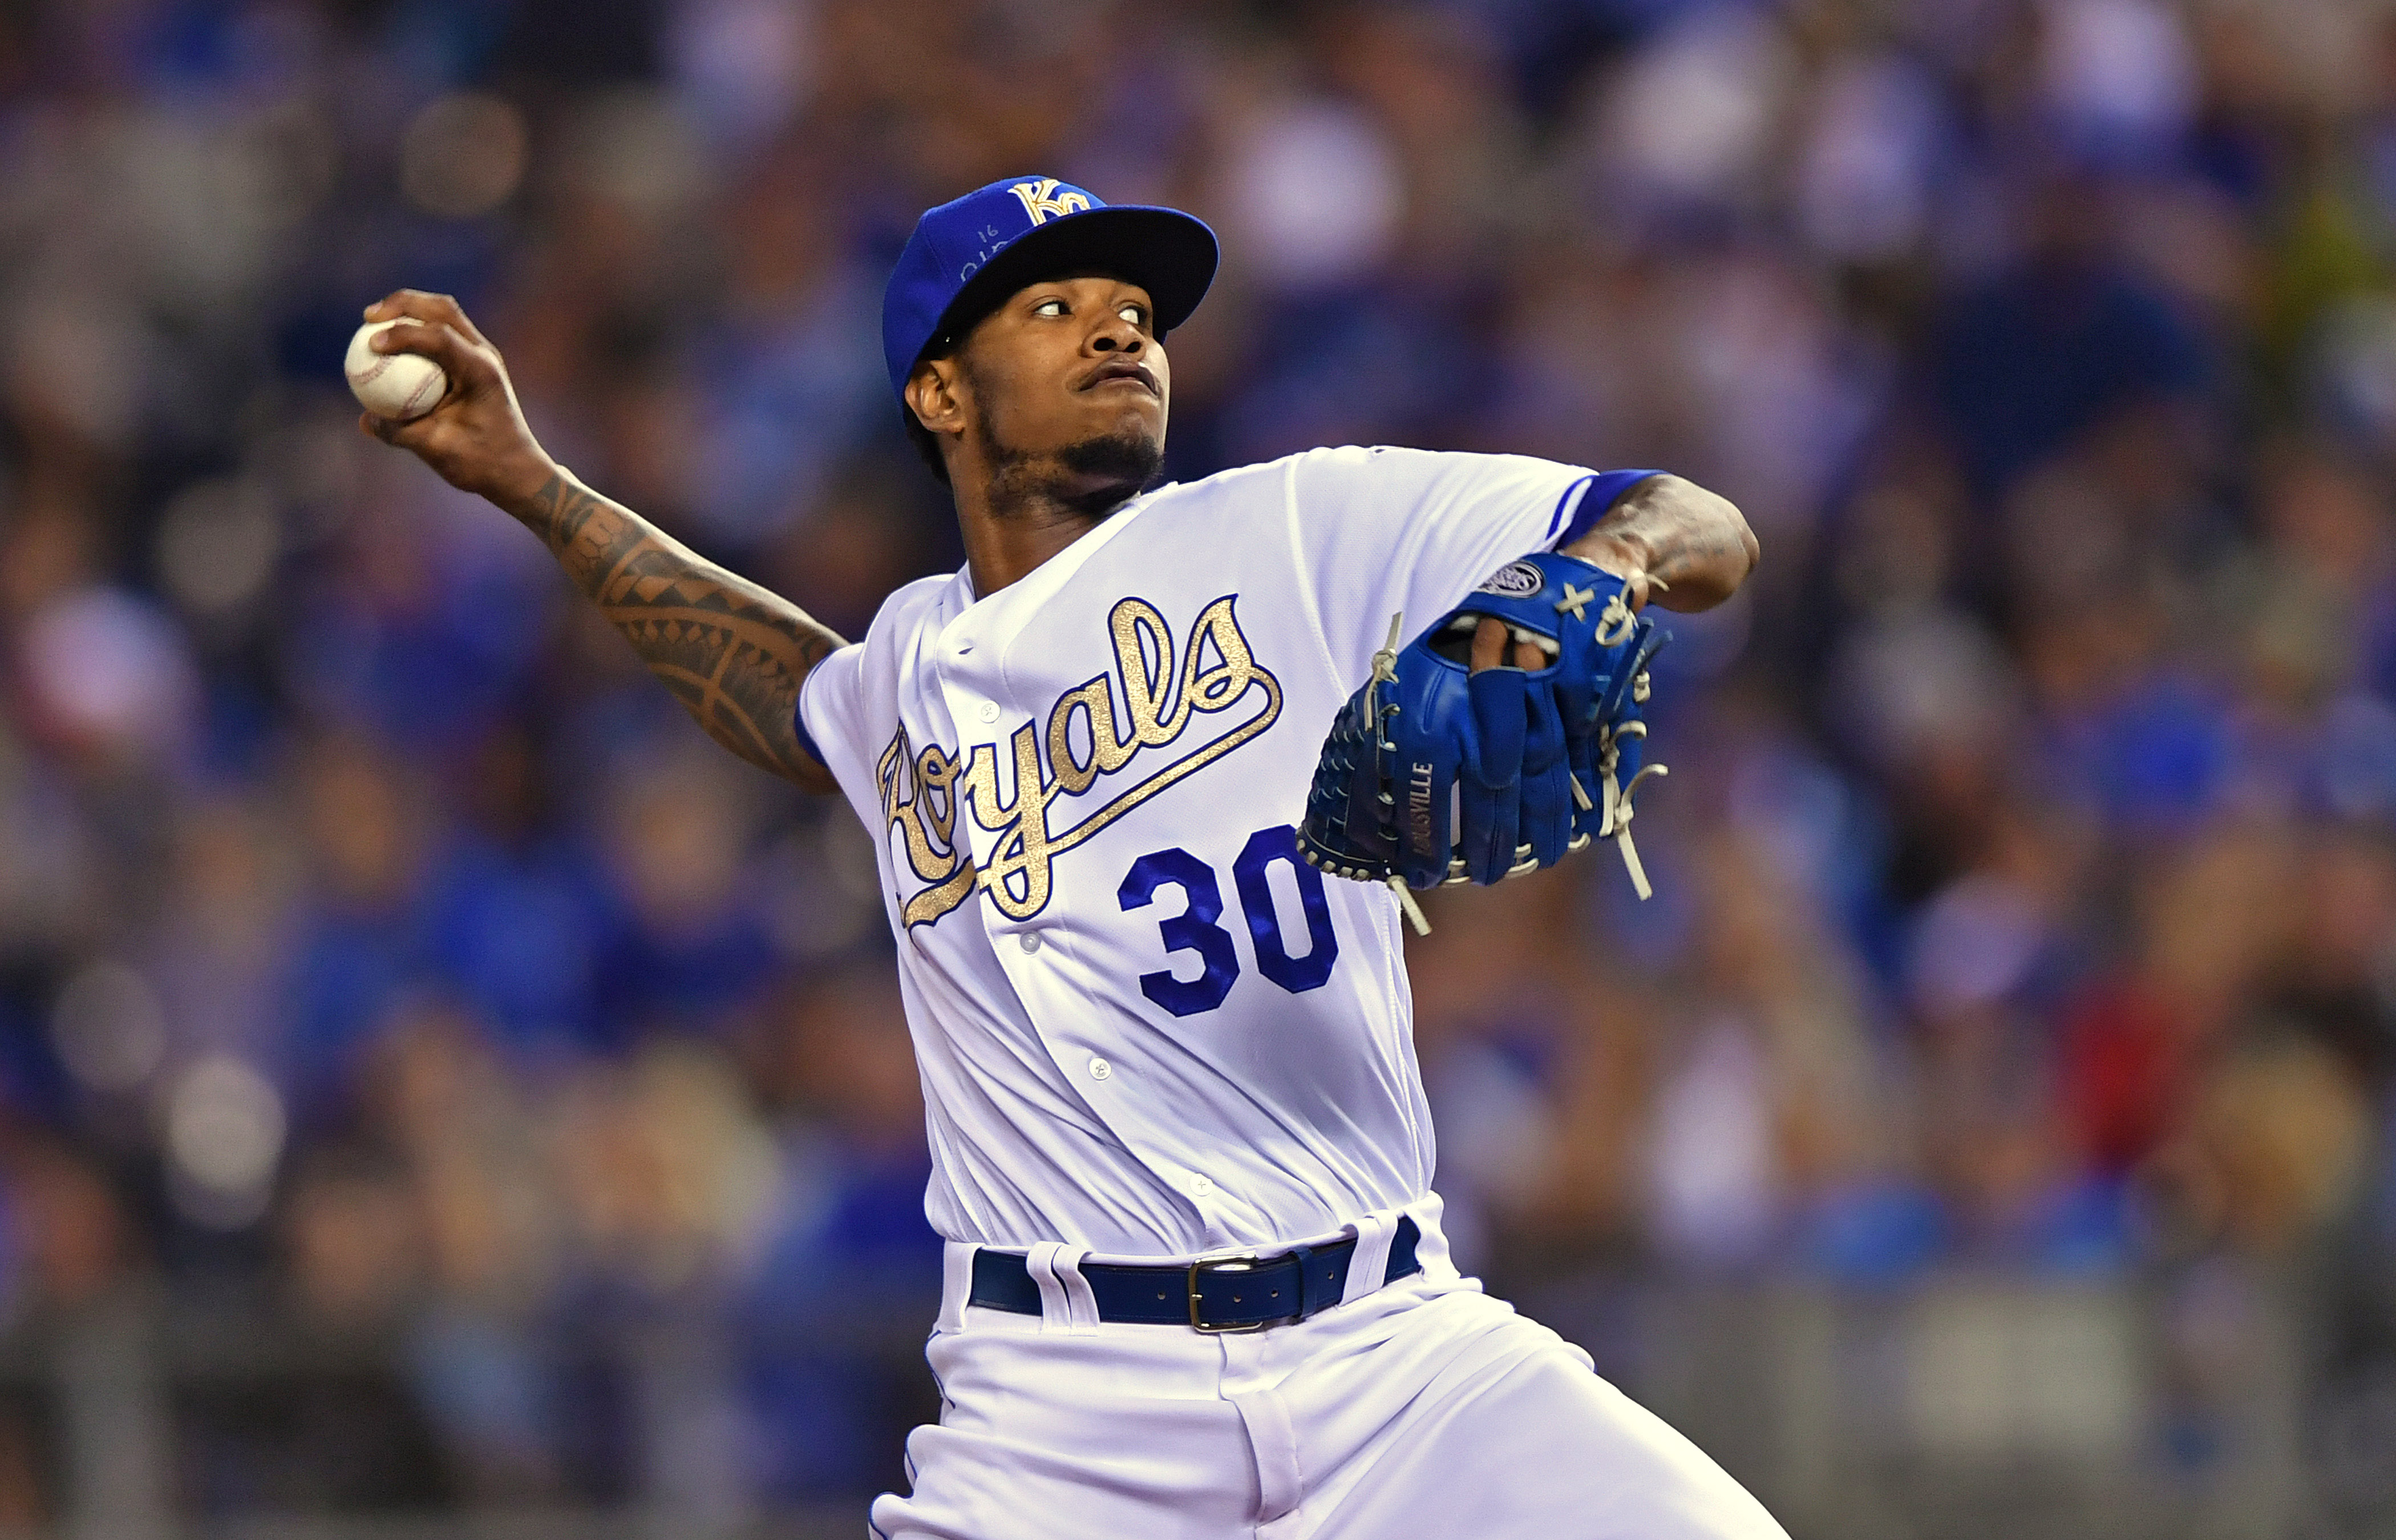 Yordano Ventura toxicology report could affect payout of contract